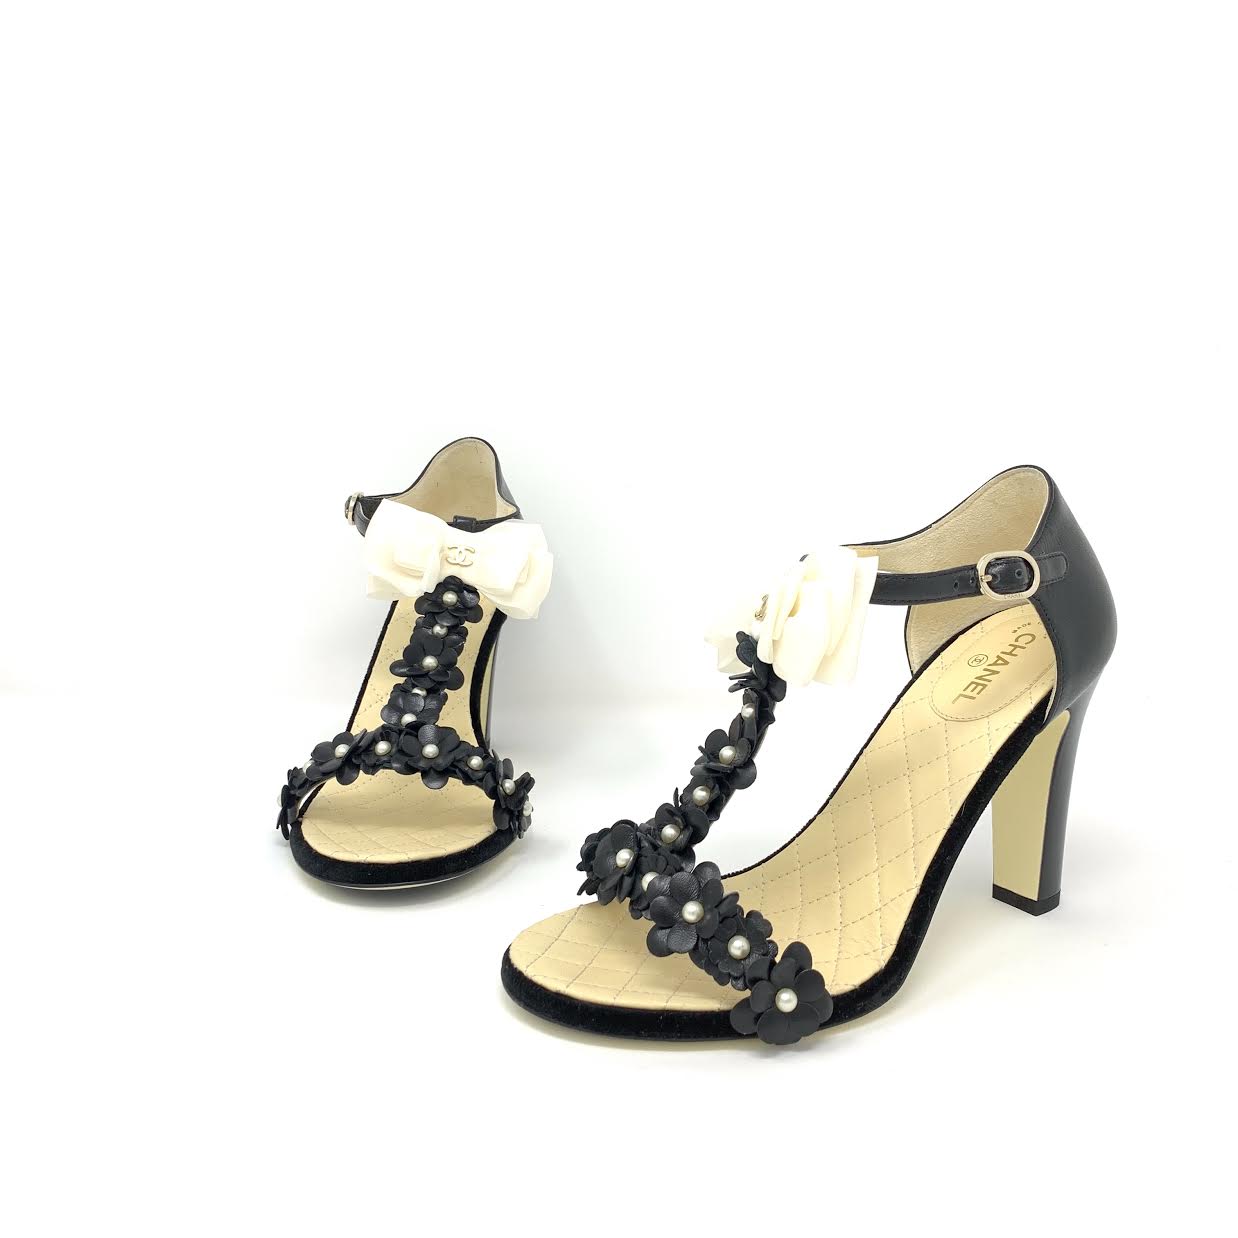 Chanel High Heeled T-strap Sandals - Size 37.5